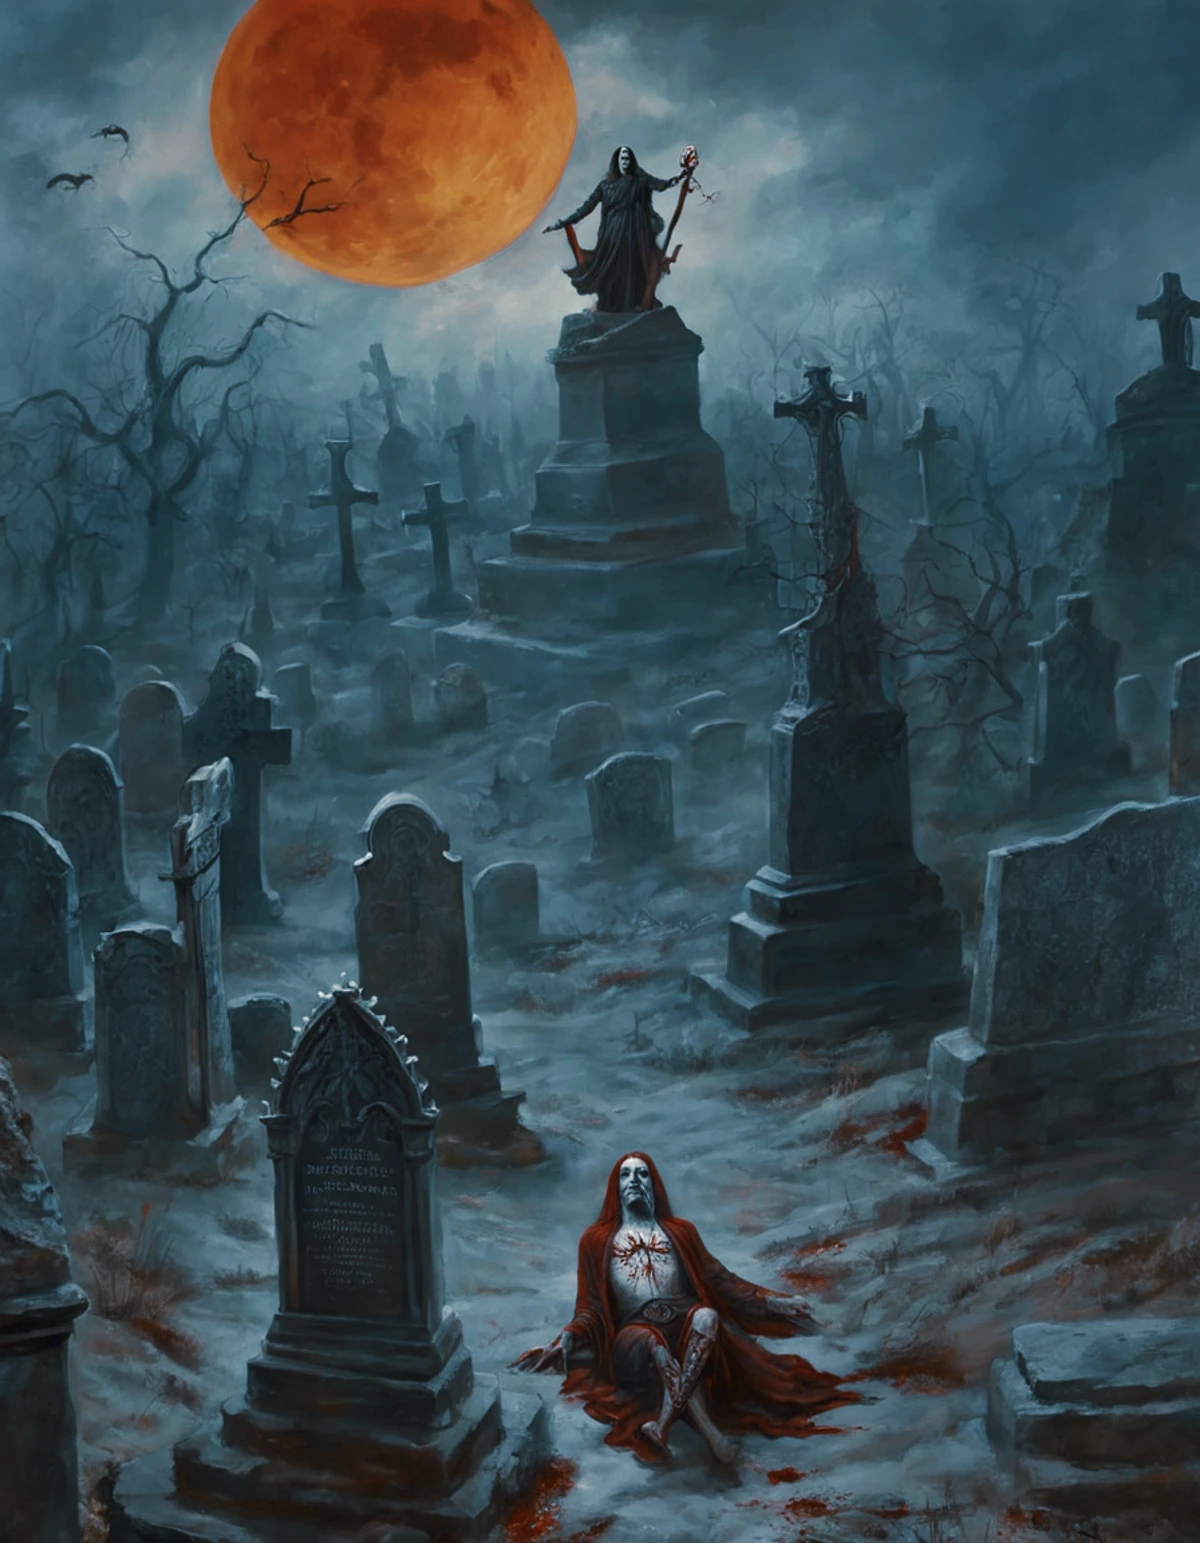 surreal painting featuring a vast, sprawling graveyard shrouded in twilight gloom. Each tombstone is a monument to a lost warrior, a tragic hero fallen in battle, ghostly apparitions rise from their graves, their spectral arms reaching out to the blood-red moon, the dry brush style accentuates the eerie stillness of the scene and the chilling sadness of these restless souls, dark, gothic, fantastical, symbolic, disturbing, intricate, highly detailed, moody lighting, complex textures, organic forms intertwined with mechanical elements